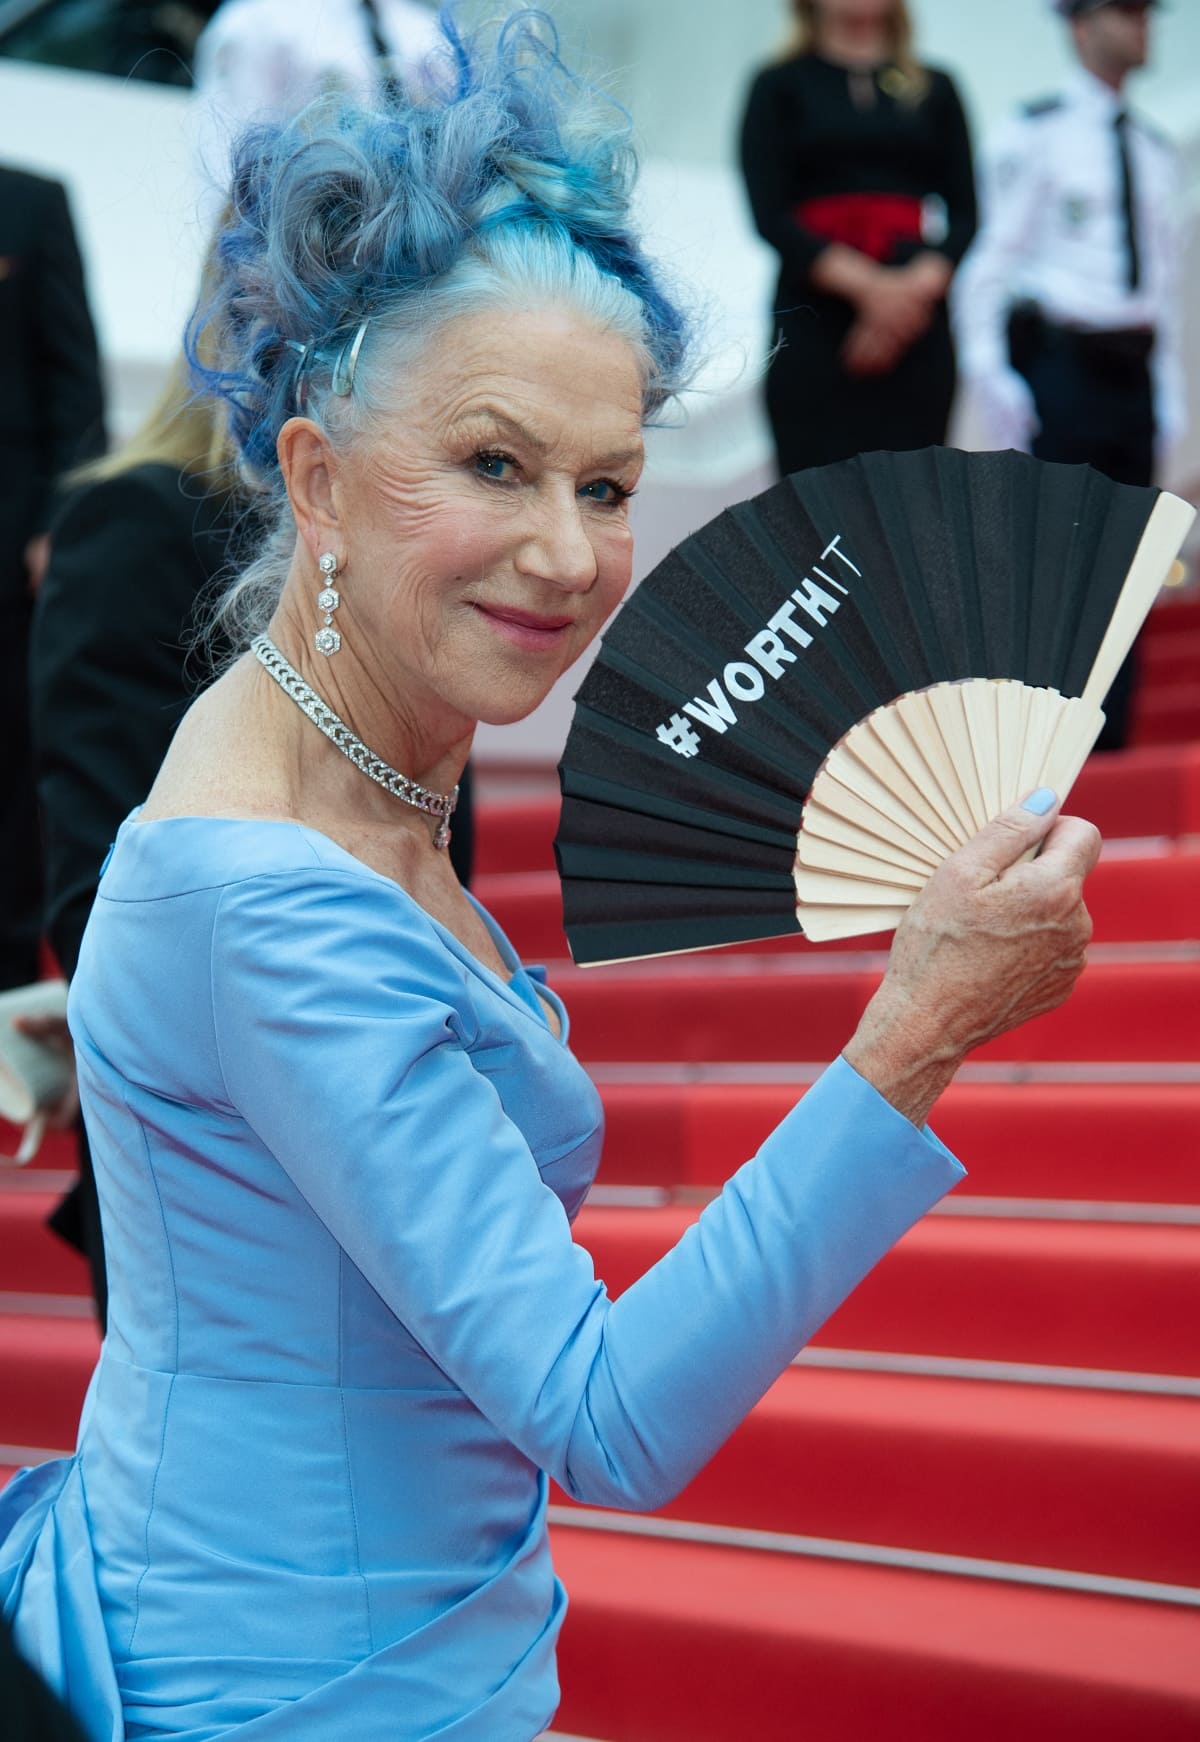 Helen Mirren cheekily held up a fan inscribed with the words #WorthIt from L’Oreal’s tagline